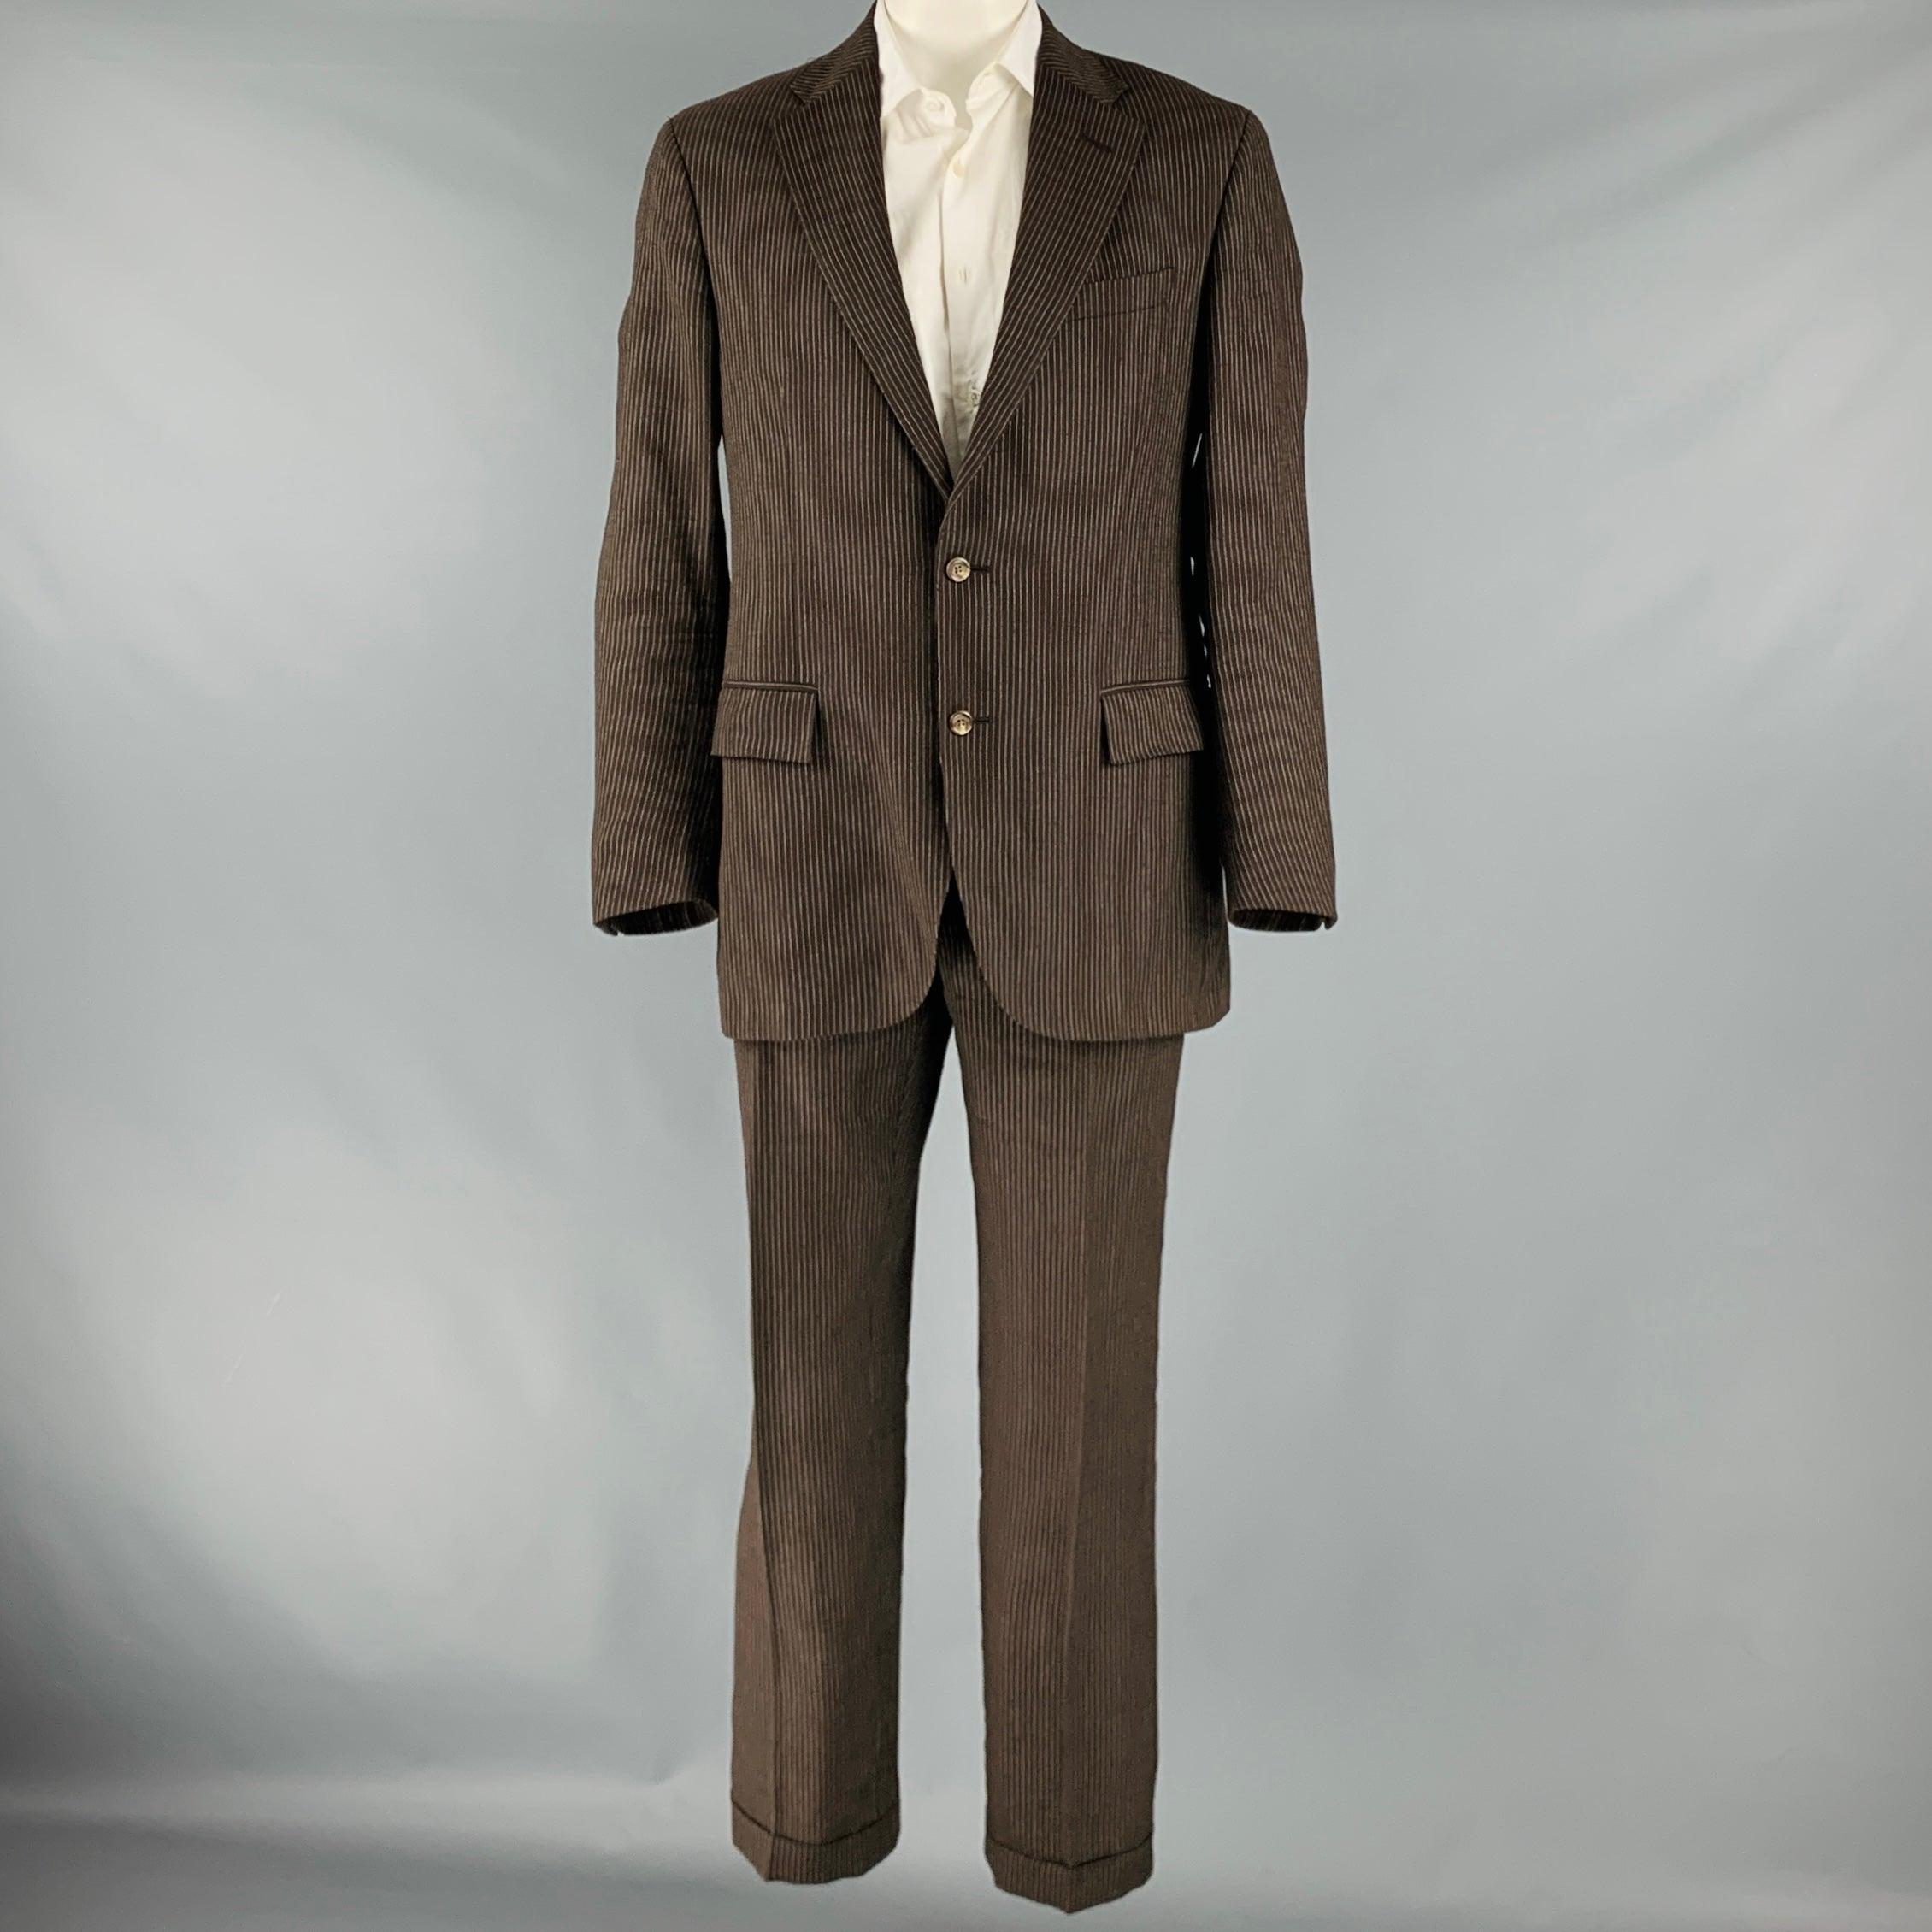 RALPH LAUREN suit
in a brown striped wool with a full liner and includes a single breasted, double button sport coat with notch lapel and matching flat front trousers. Made in Italy.Very Good Pre-Owned Condition. Mild pilling on legs. 

Marked:  